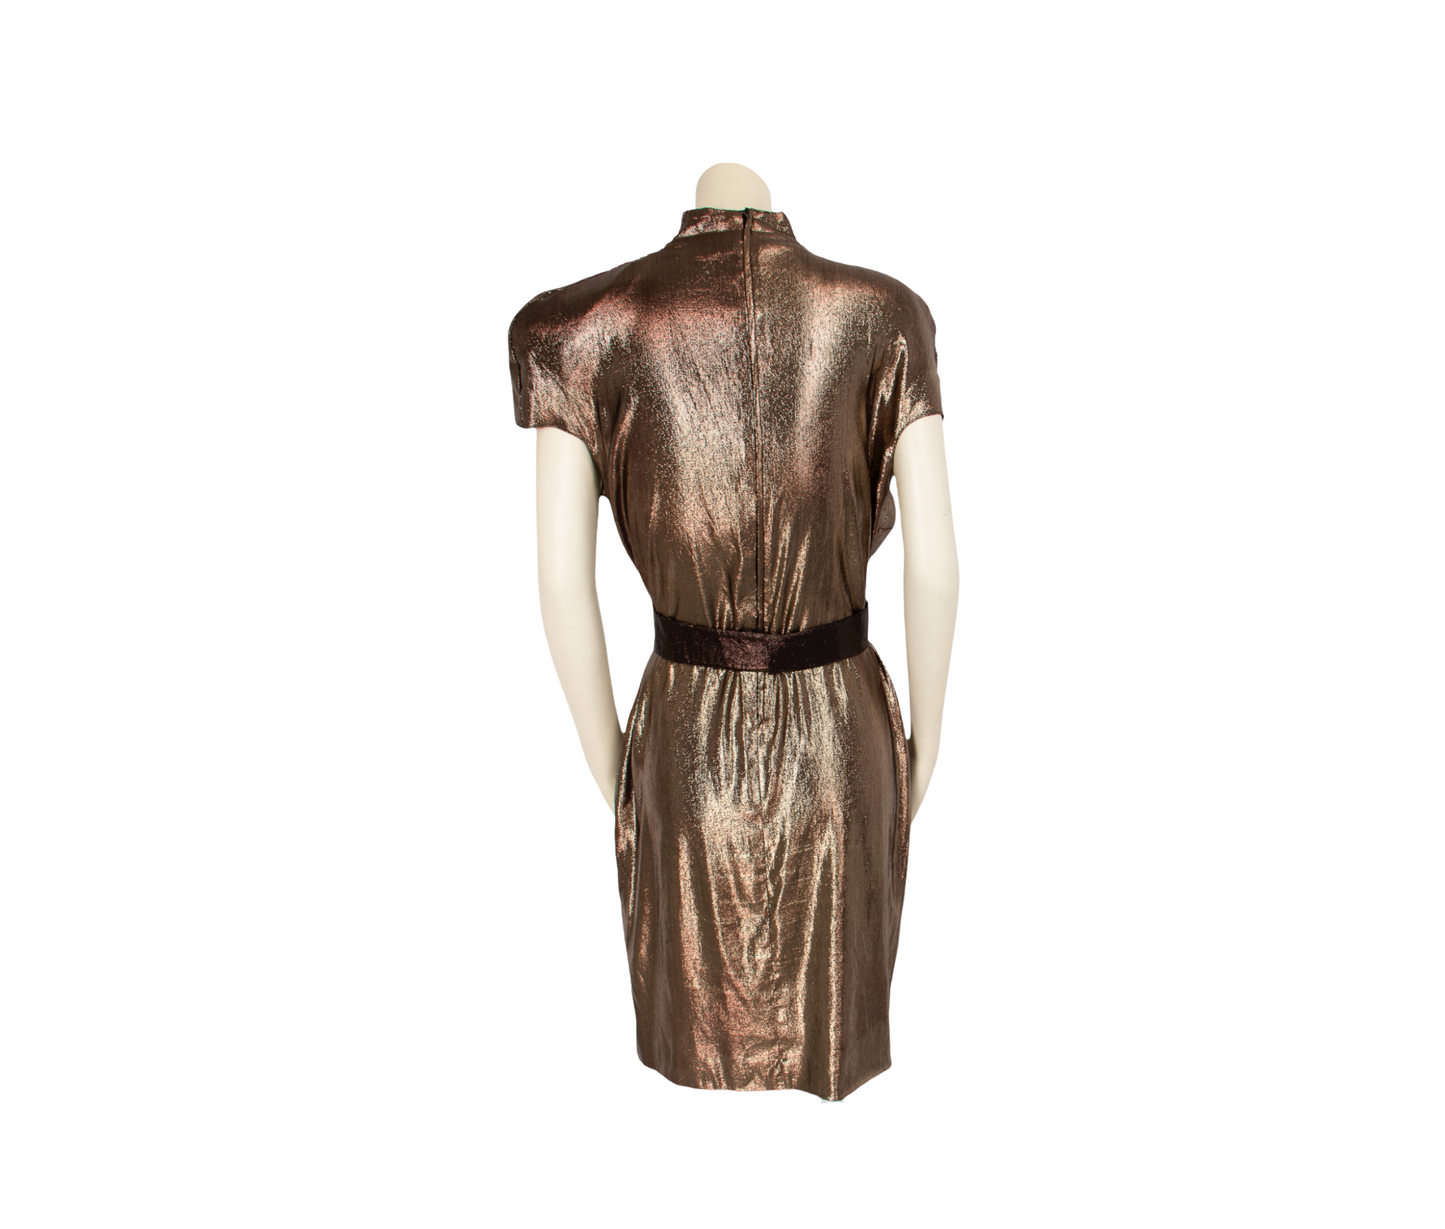 THIERRY MUGLER Dresses vintage Lysis Paris pre-owned secondhand